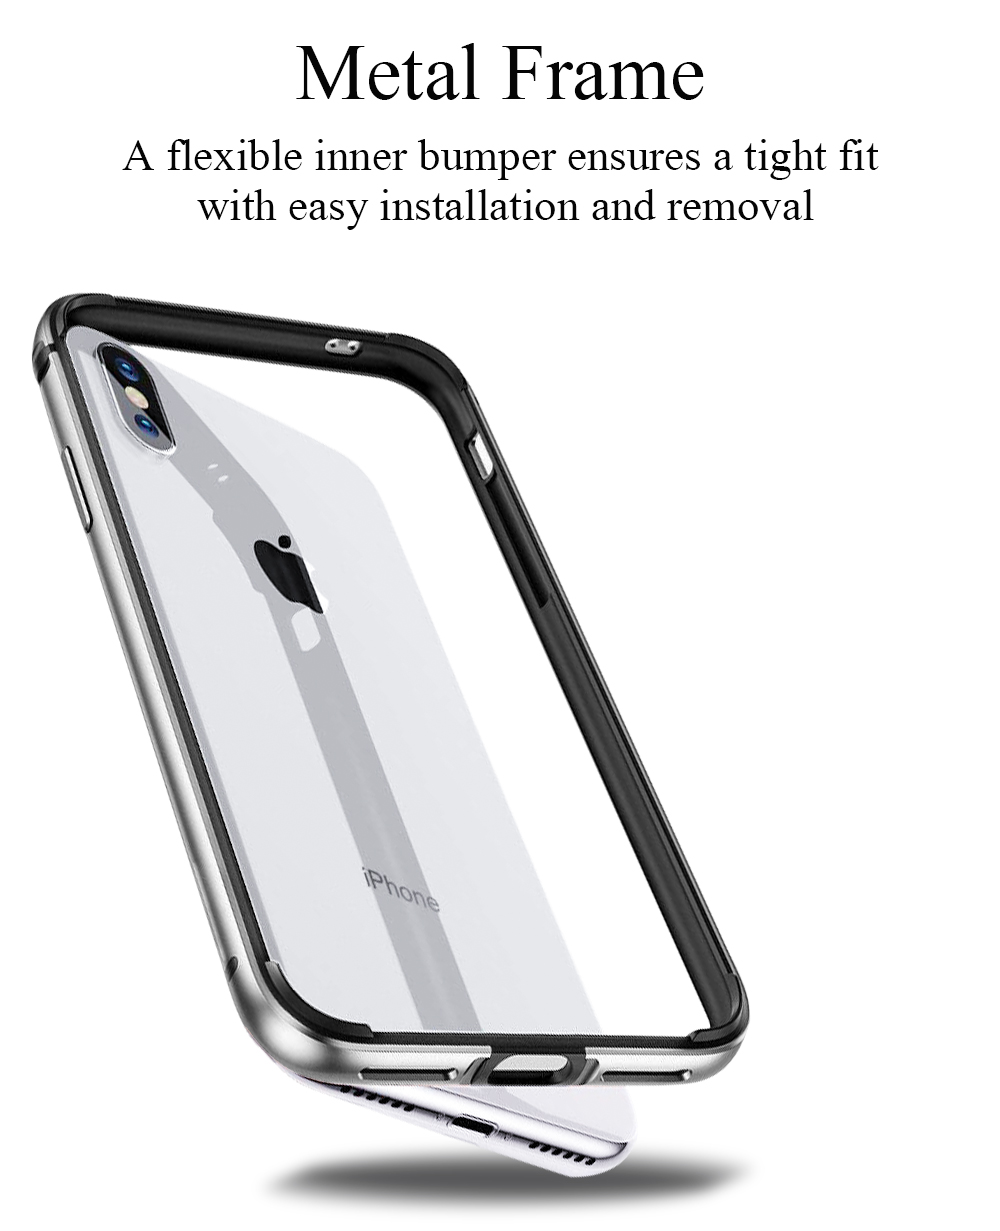 Ascromy For iPhone XS Max Case Bumper Luxury Aluminum Metal Silicone Frame Coque Phone Case For iPhone 10 XR X Funda Accessories (6)